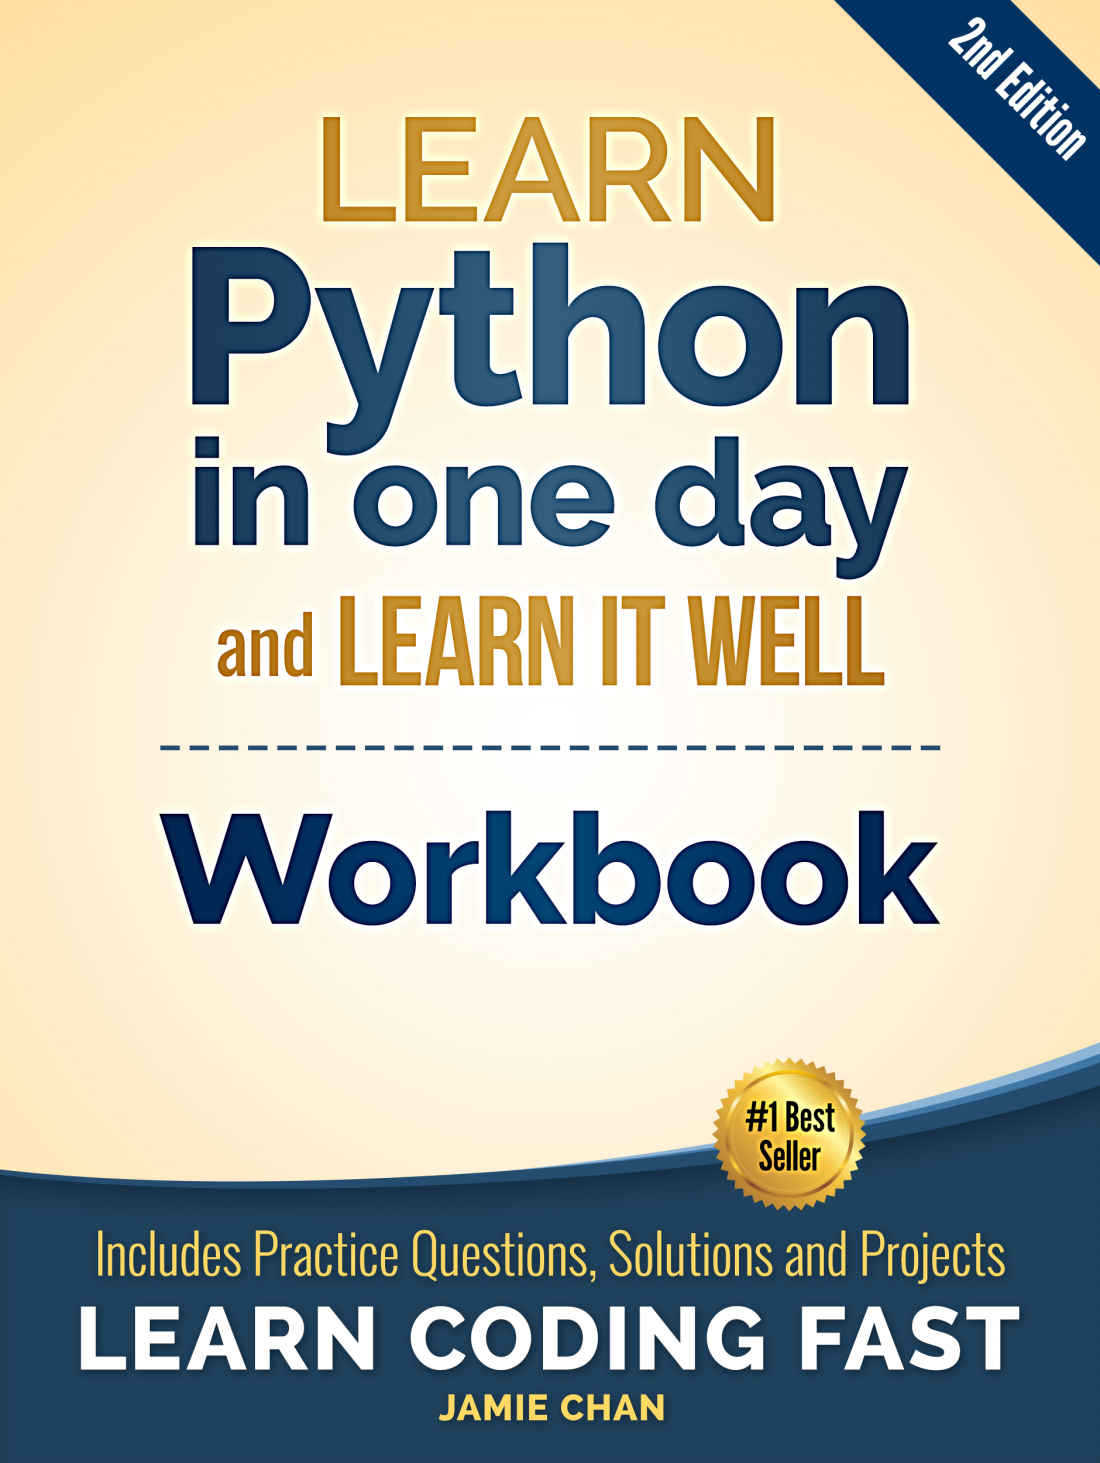 Python Workbook: Learn Python in One Day and Learn It Well